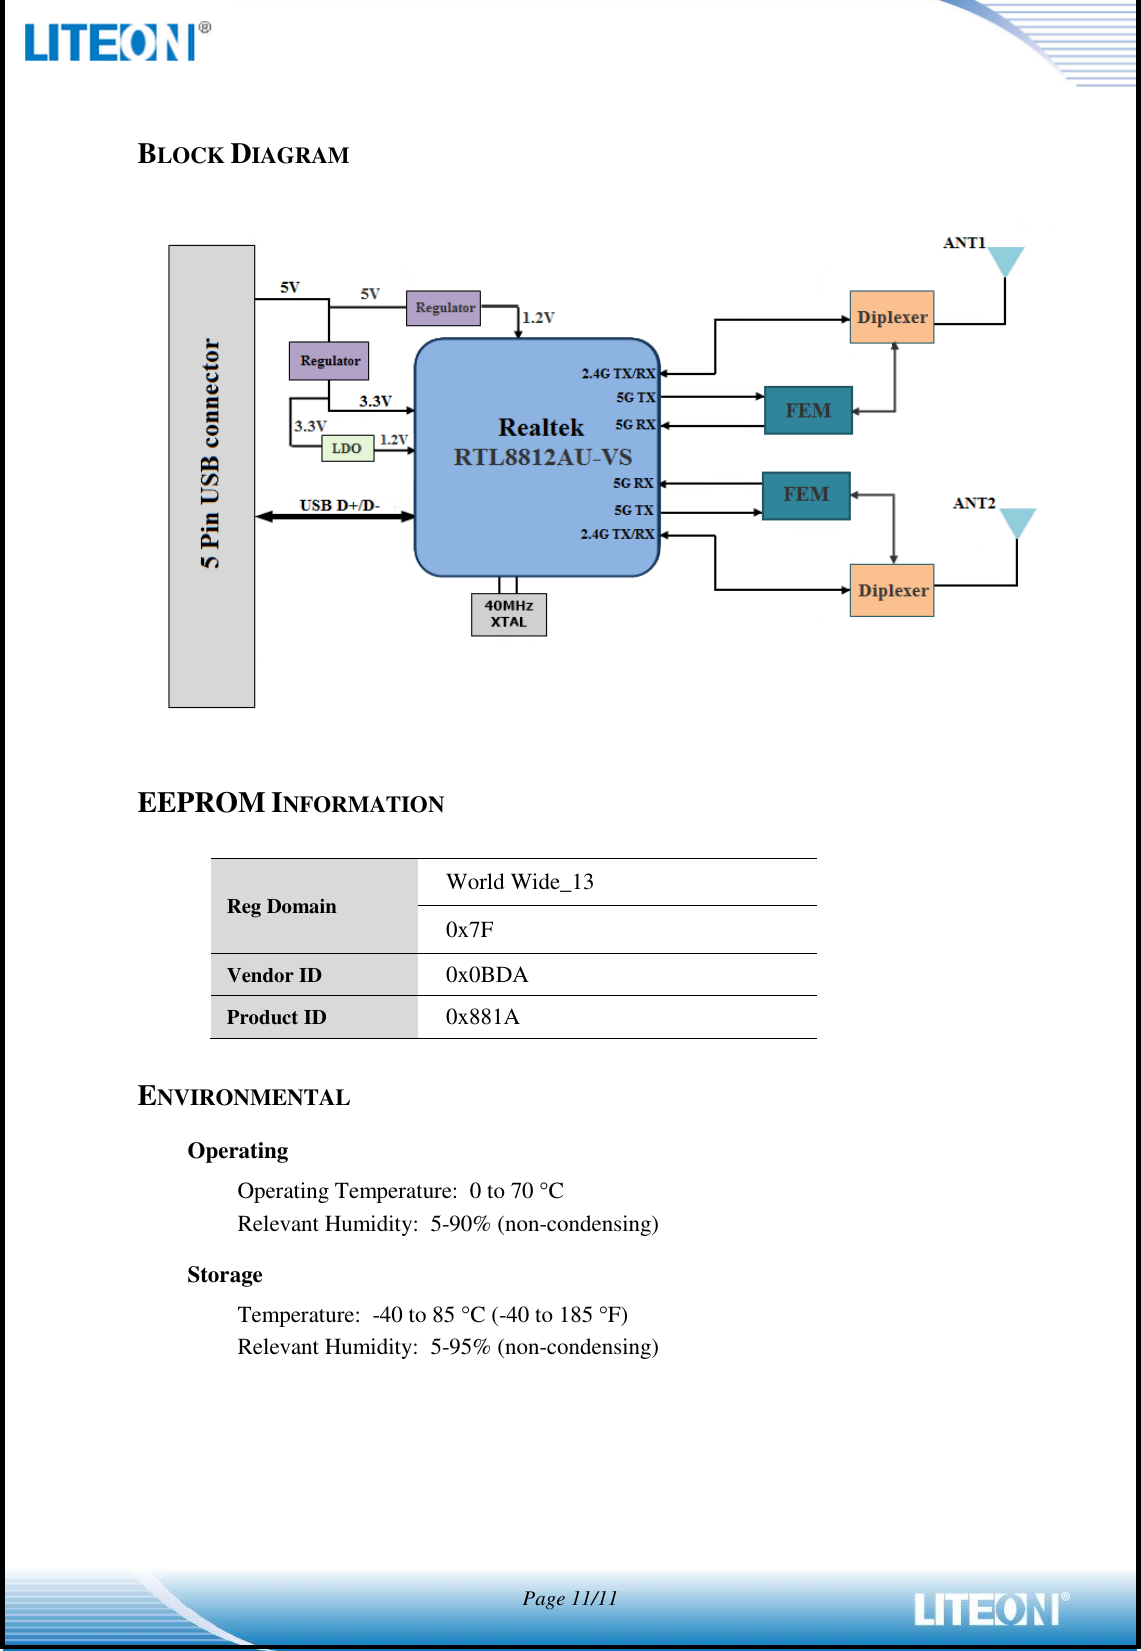  Page 11/11   BLOCK DIAGRAM    EEPROM INFORMATION  Reg Domain World Wide_13 0x7F Vendor ID 0x0BDA Product ID 0x881A  ENVIRONMENTAL Operating Operating Temperature:  0 to 70 C   Relevant Humidity:  5-90% (non-condensing) Storage Temperature:  -40 to 85 C (-40 to 185 F) Relevant Humidity:  5-95% (non-condensing)  